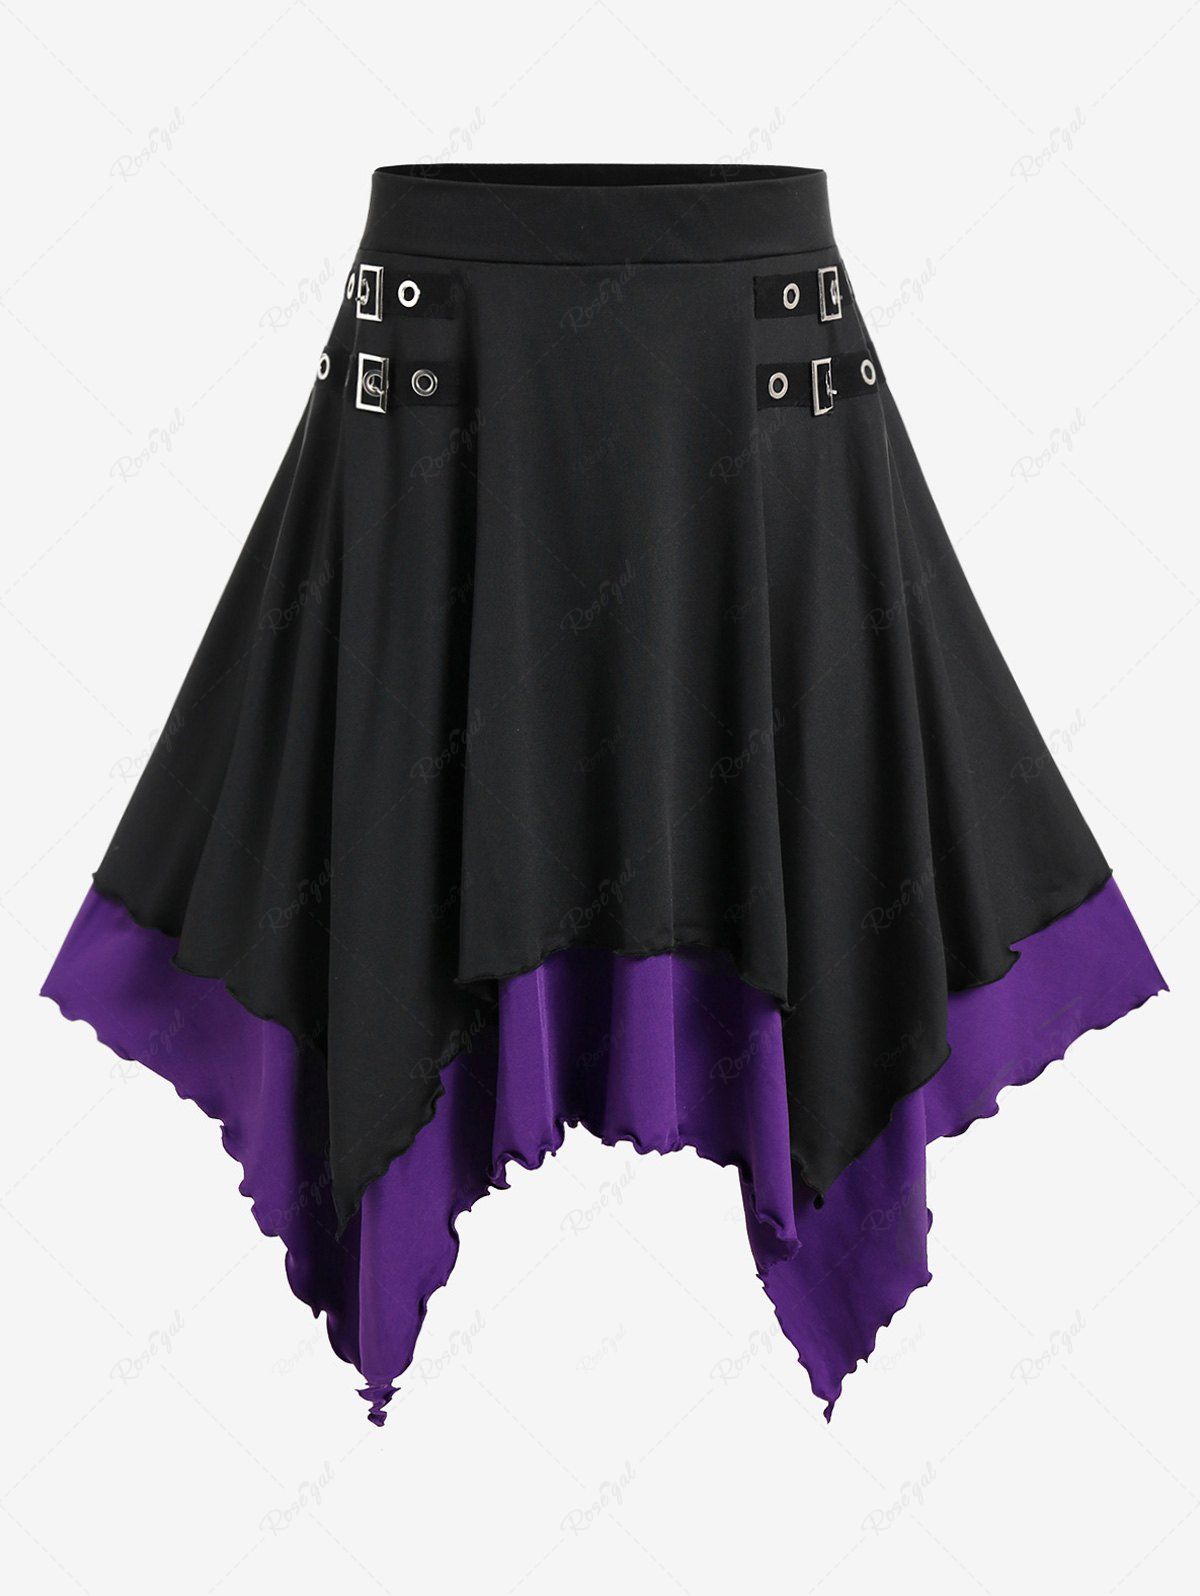 Trendy Gothic Buckles Two Tone Double Layered Handkerchief Skirt  